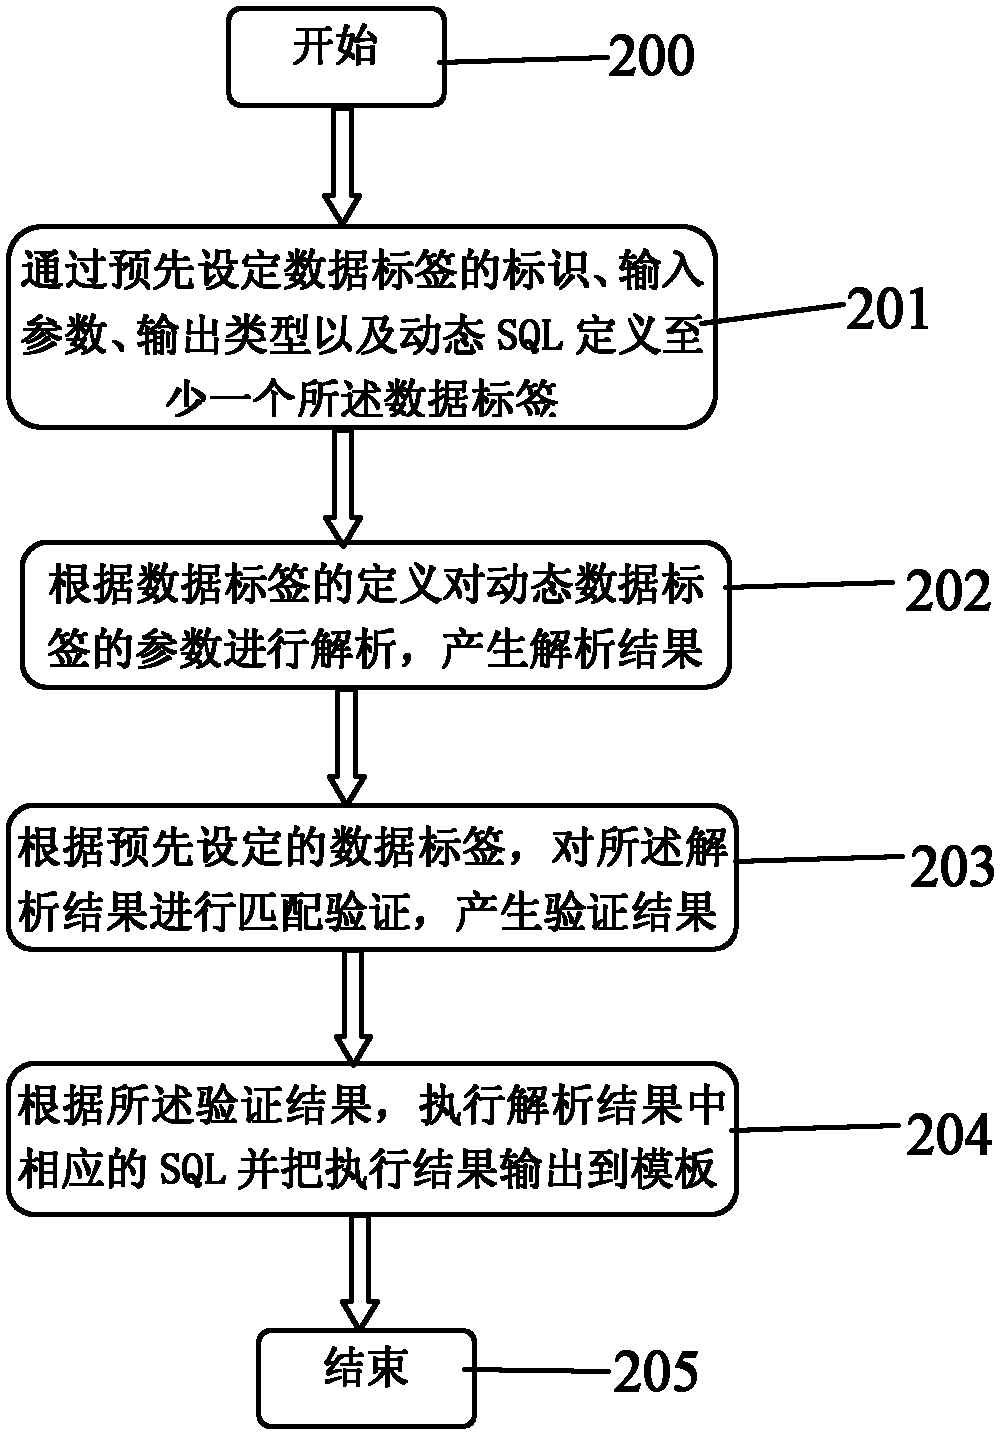 Method and system for setting dynamic data label